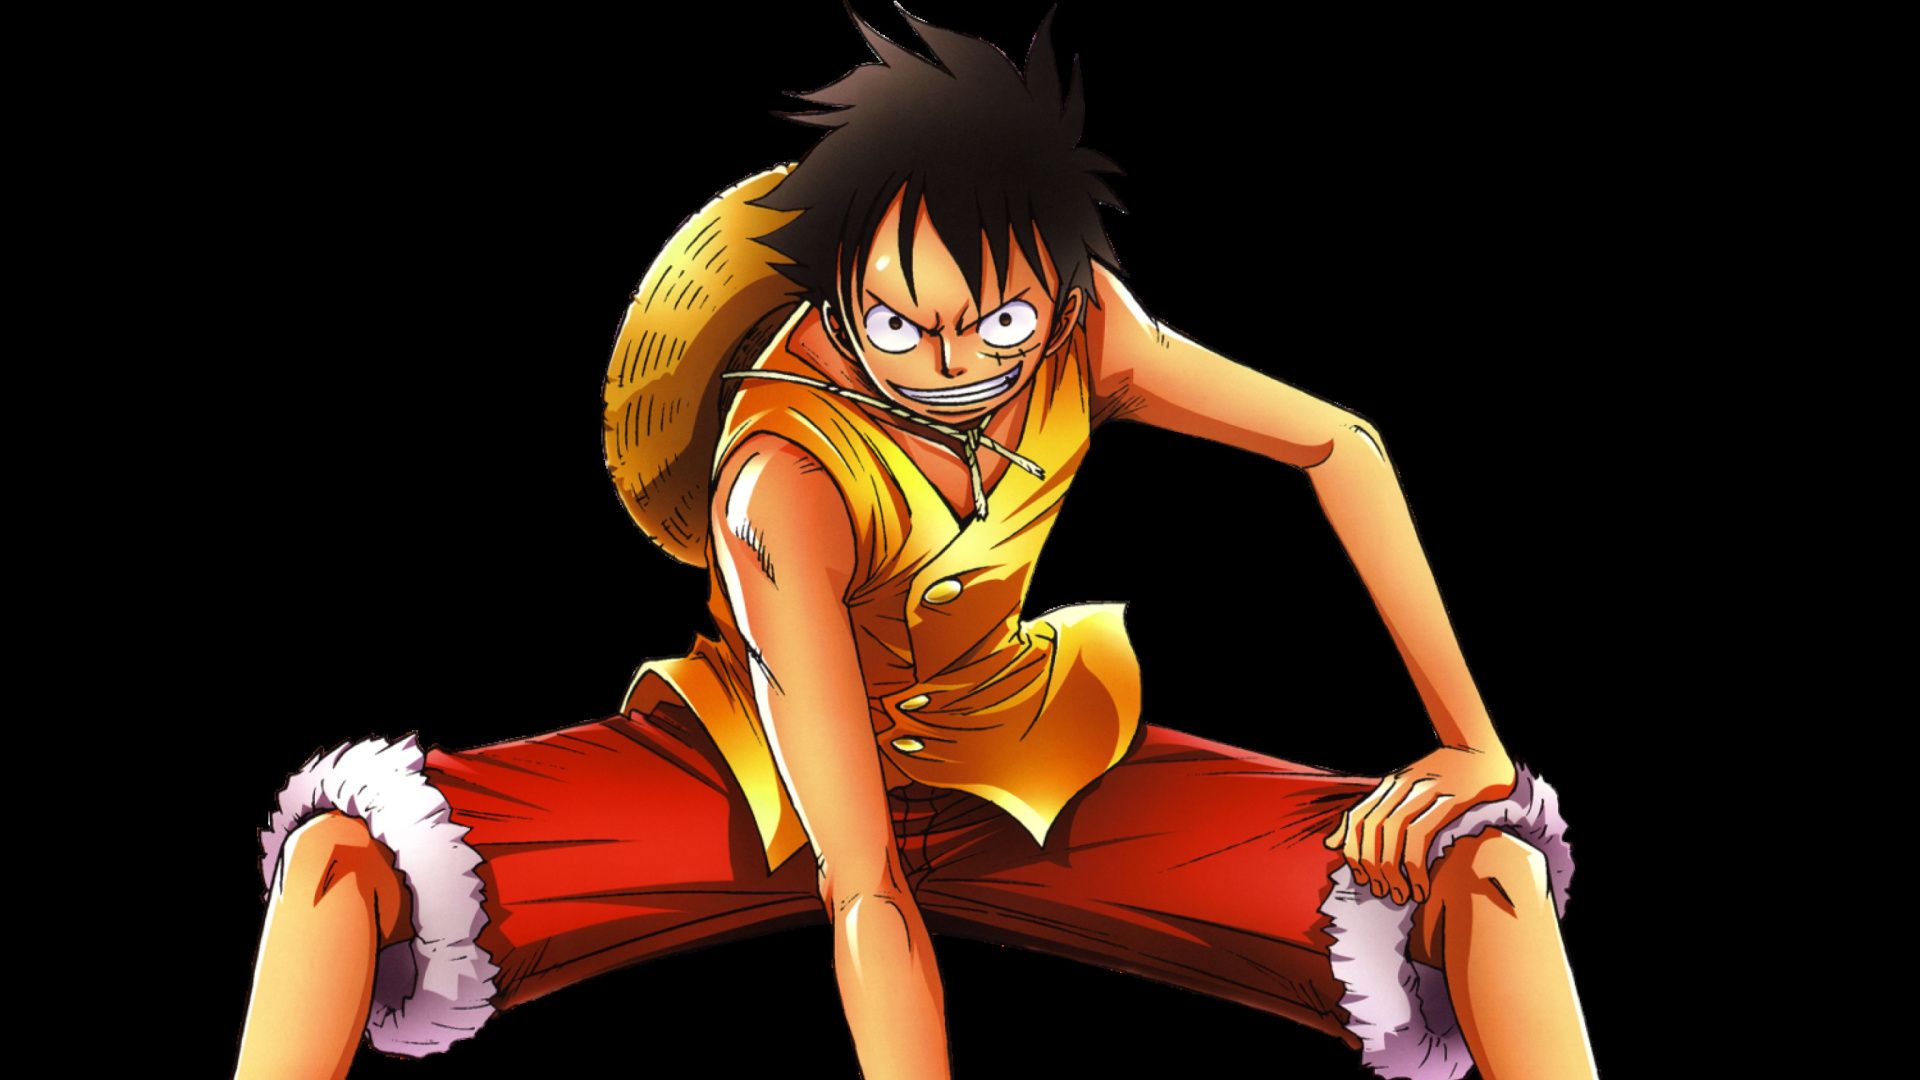 Best 41+ Luffy Gear Second Wallpapers on HipWallpapers.